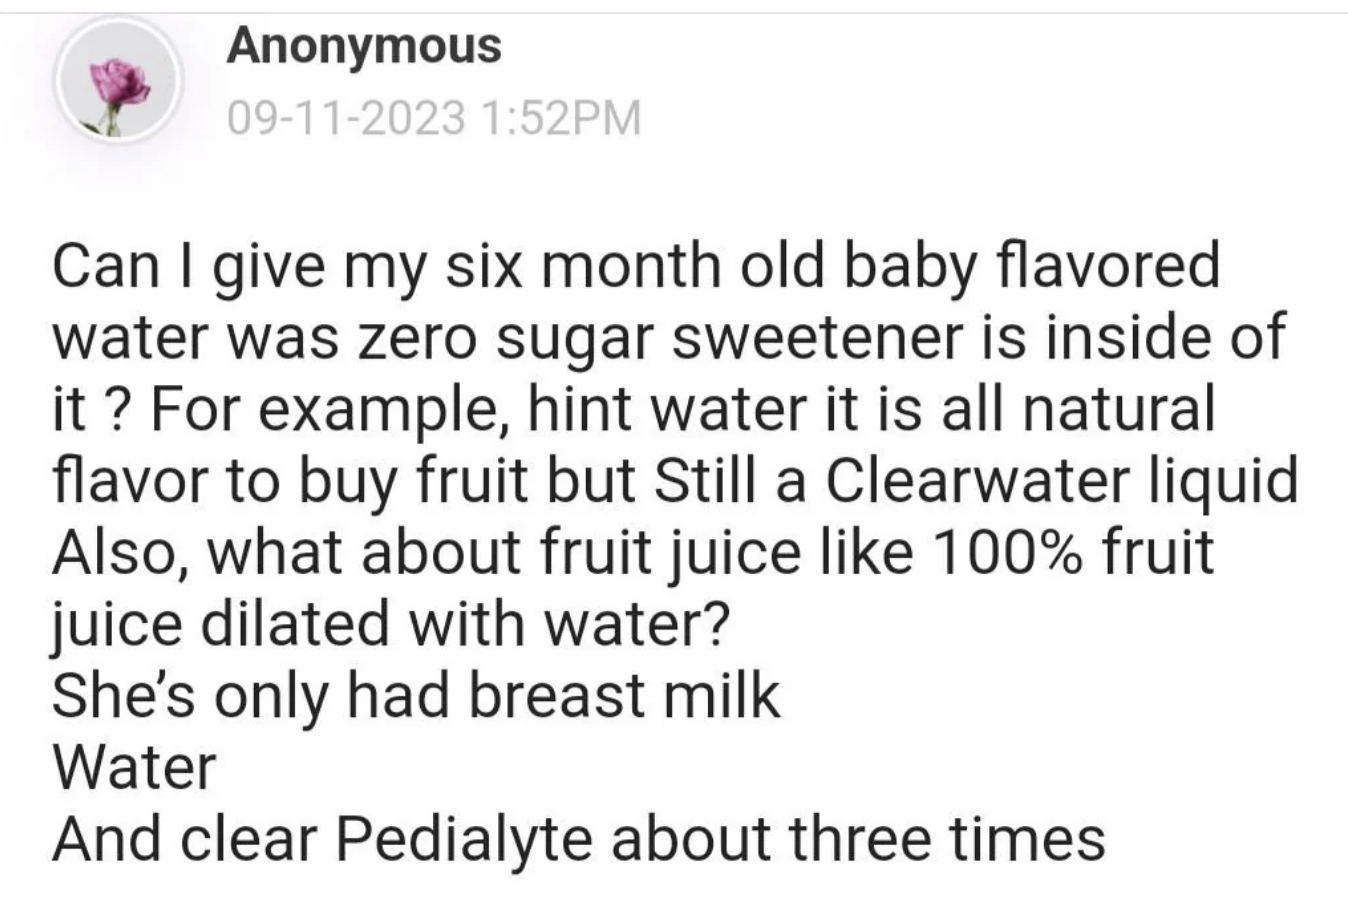 &quot;And clear Pedialyte about three times&quot;